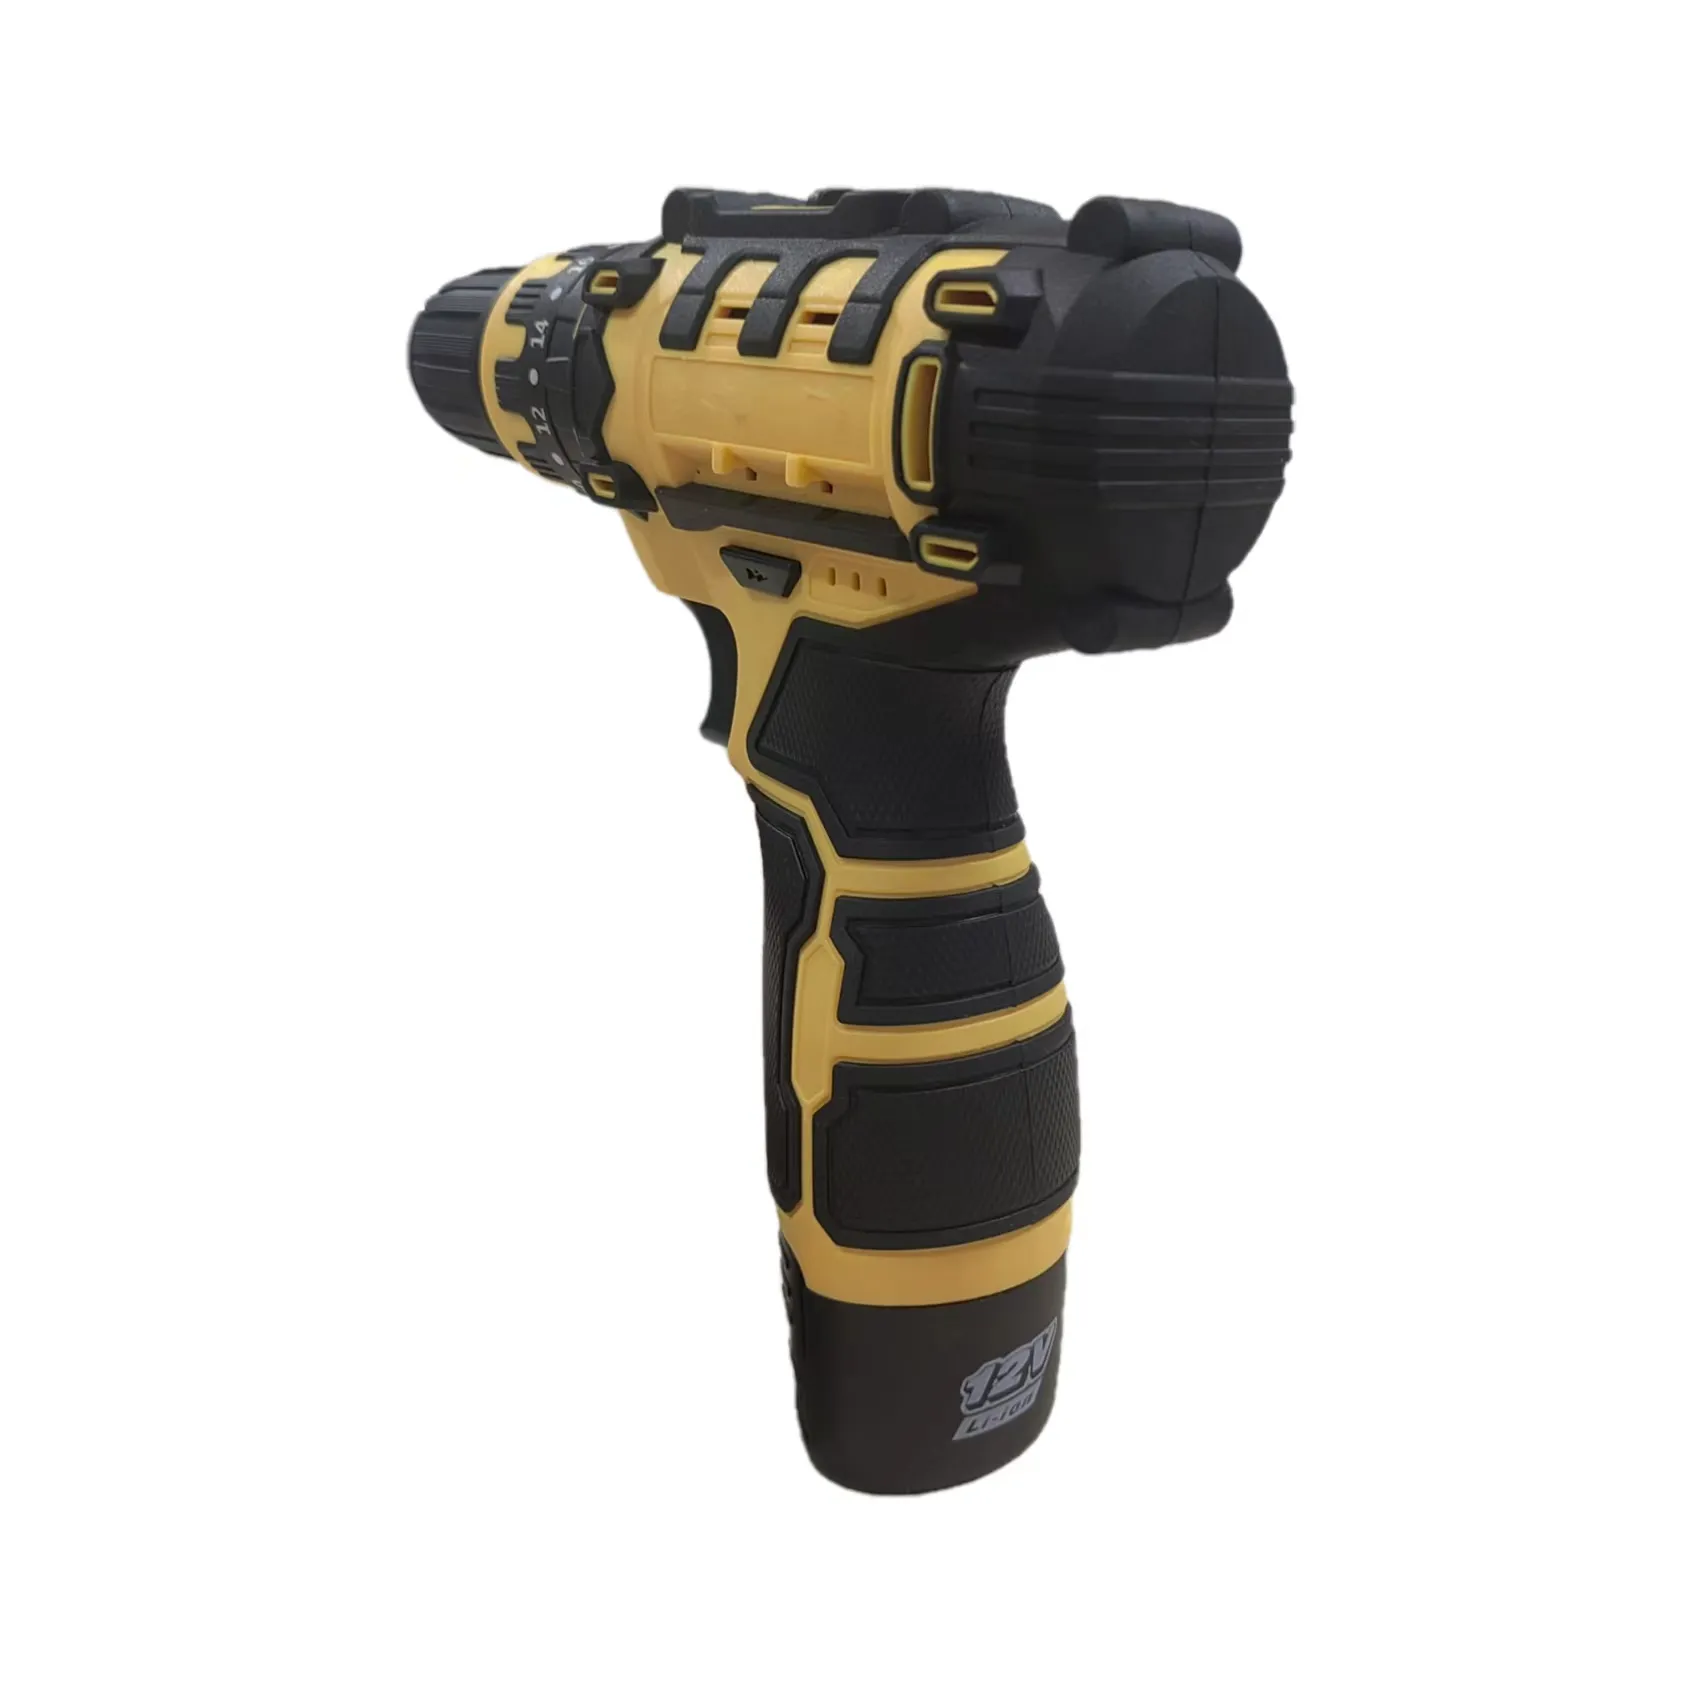 12v Manufacturer Cordless Rechargeable Electric Hand Drill Household Power Lithium Impact Drill Tools